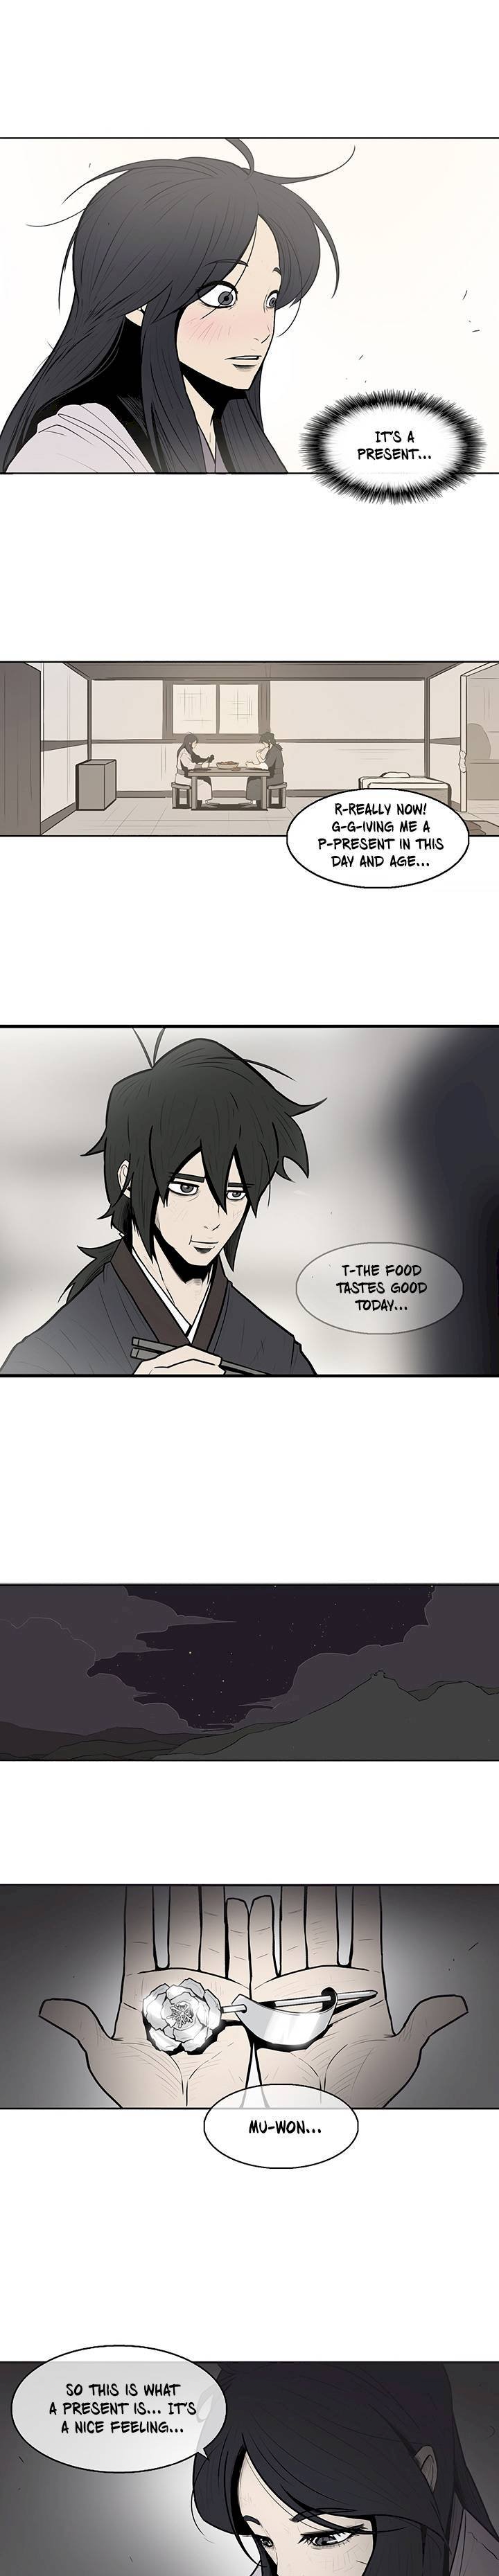 legend-of-the-northern-blade-chap-8-10